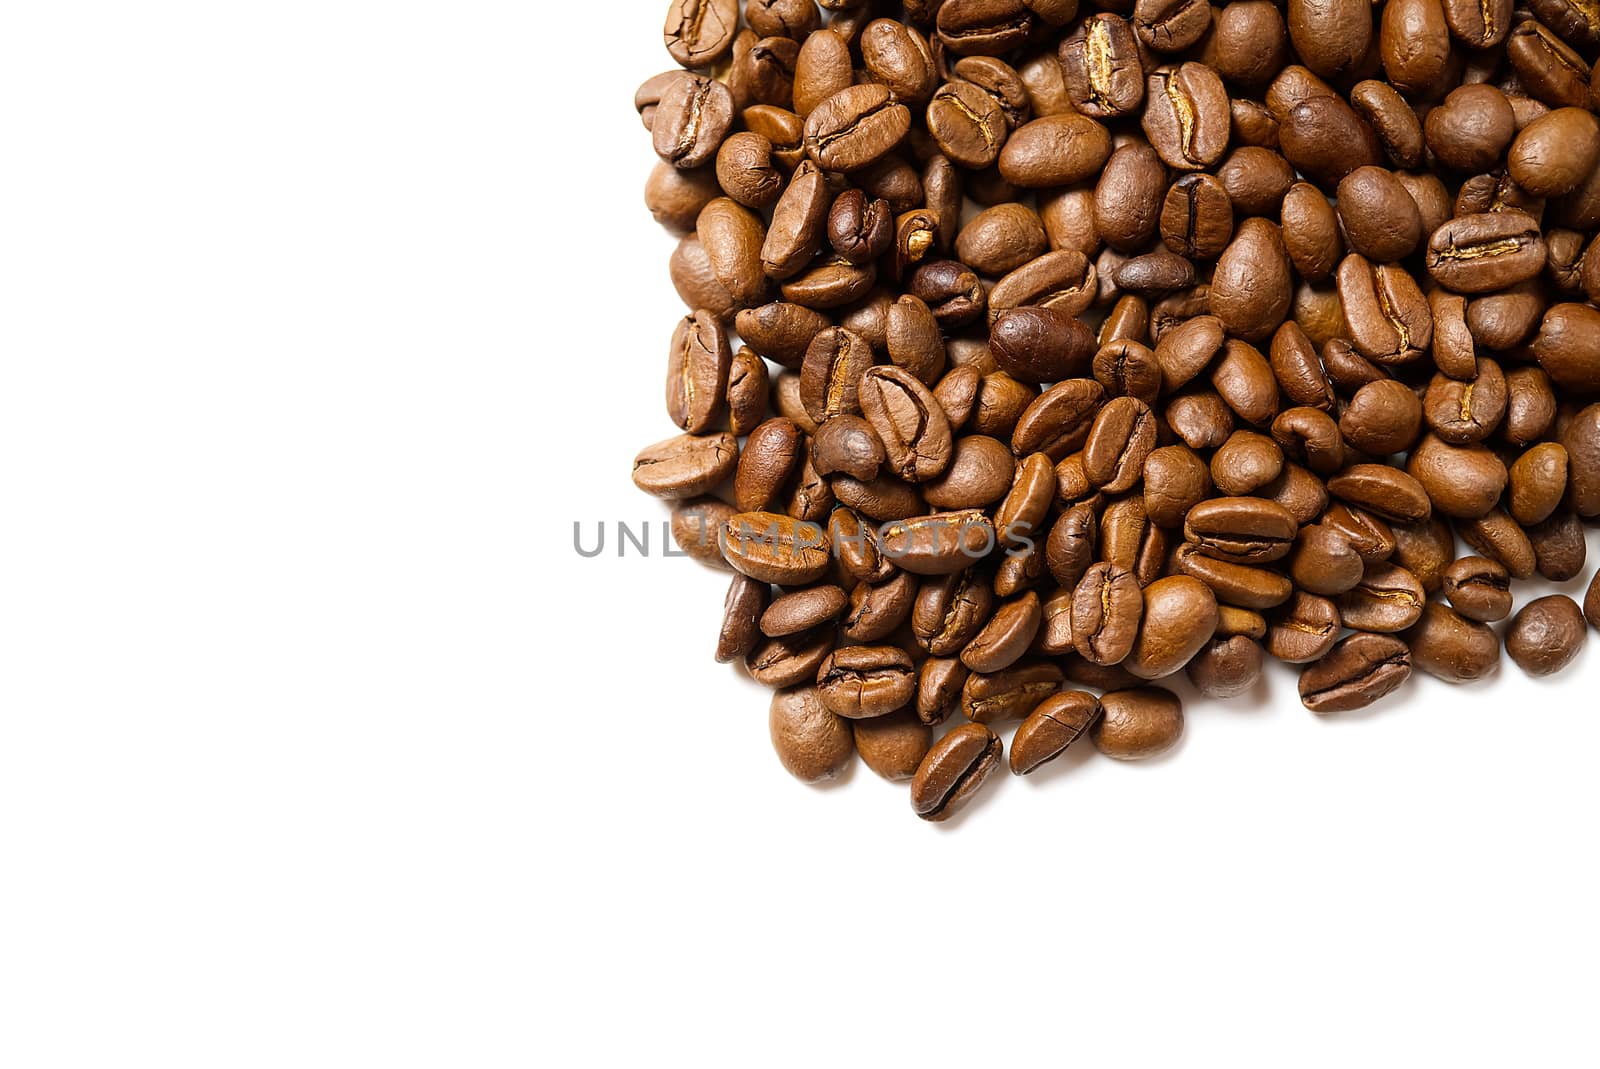 Pile of roasted coffee beans isolated in white background, by PhotoTime